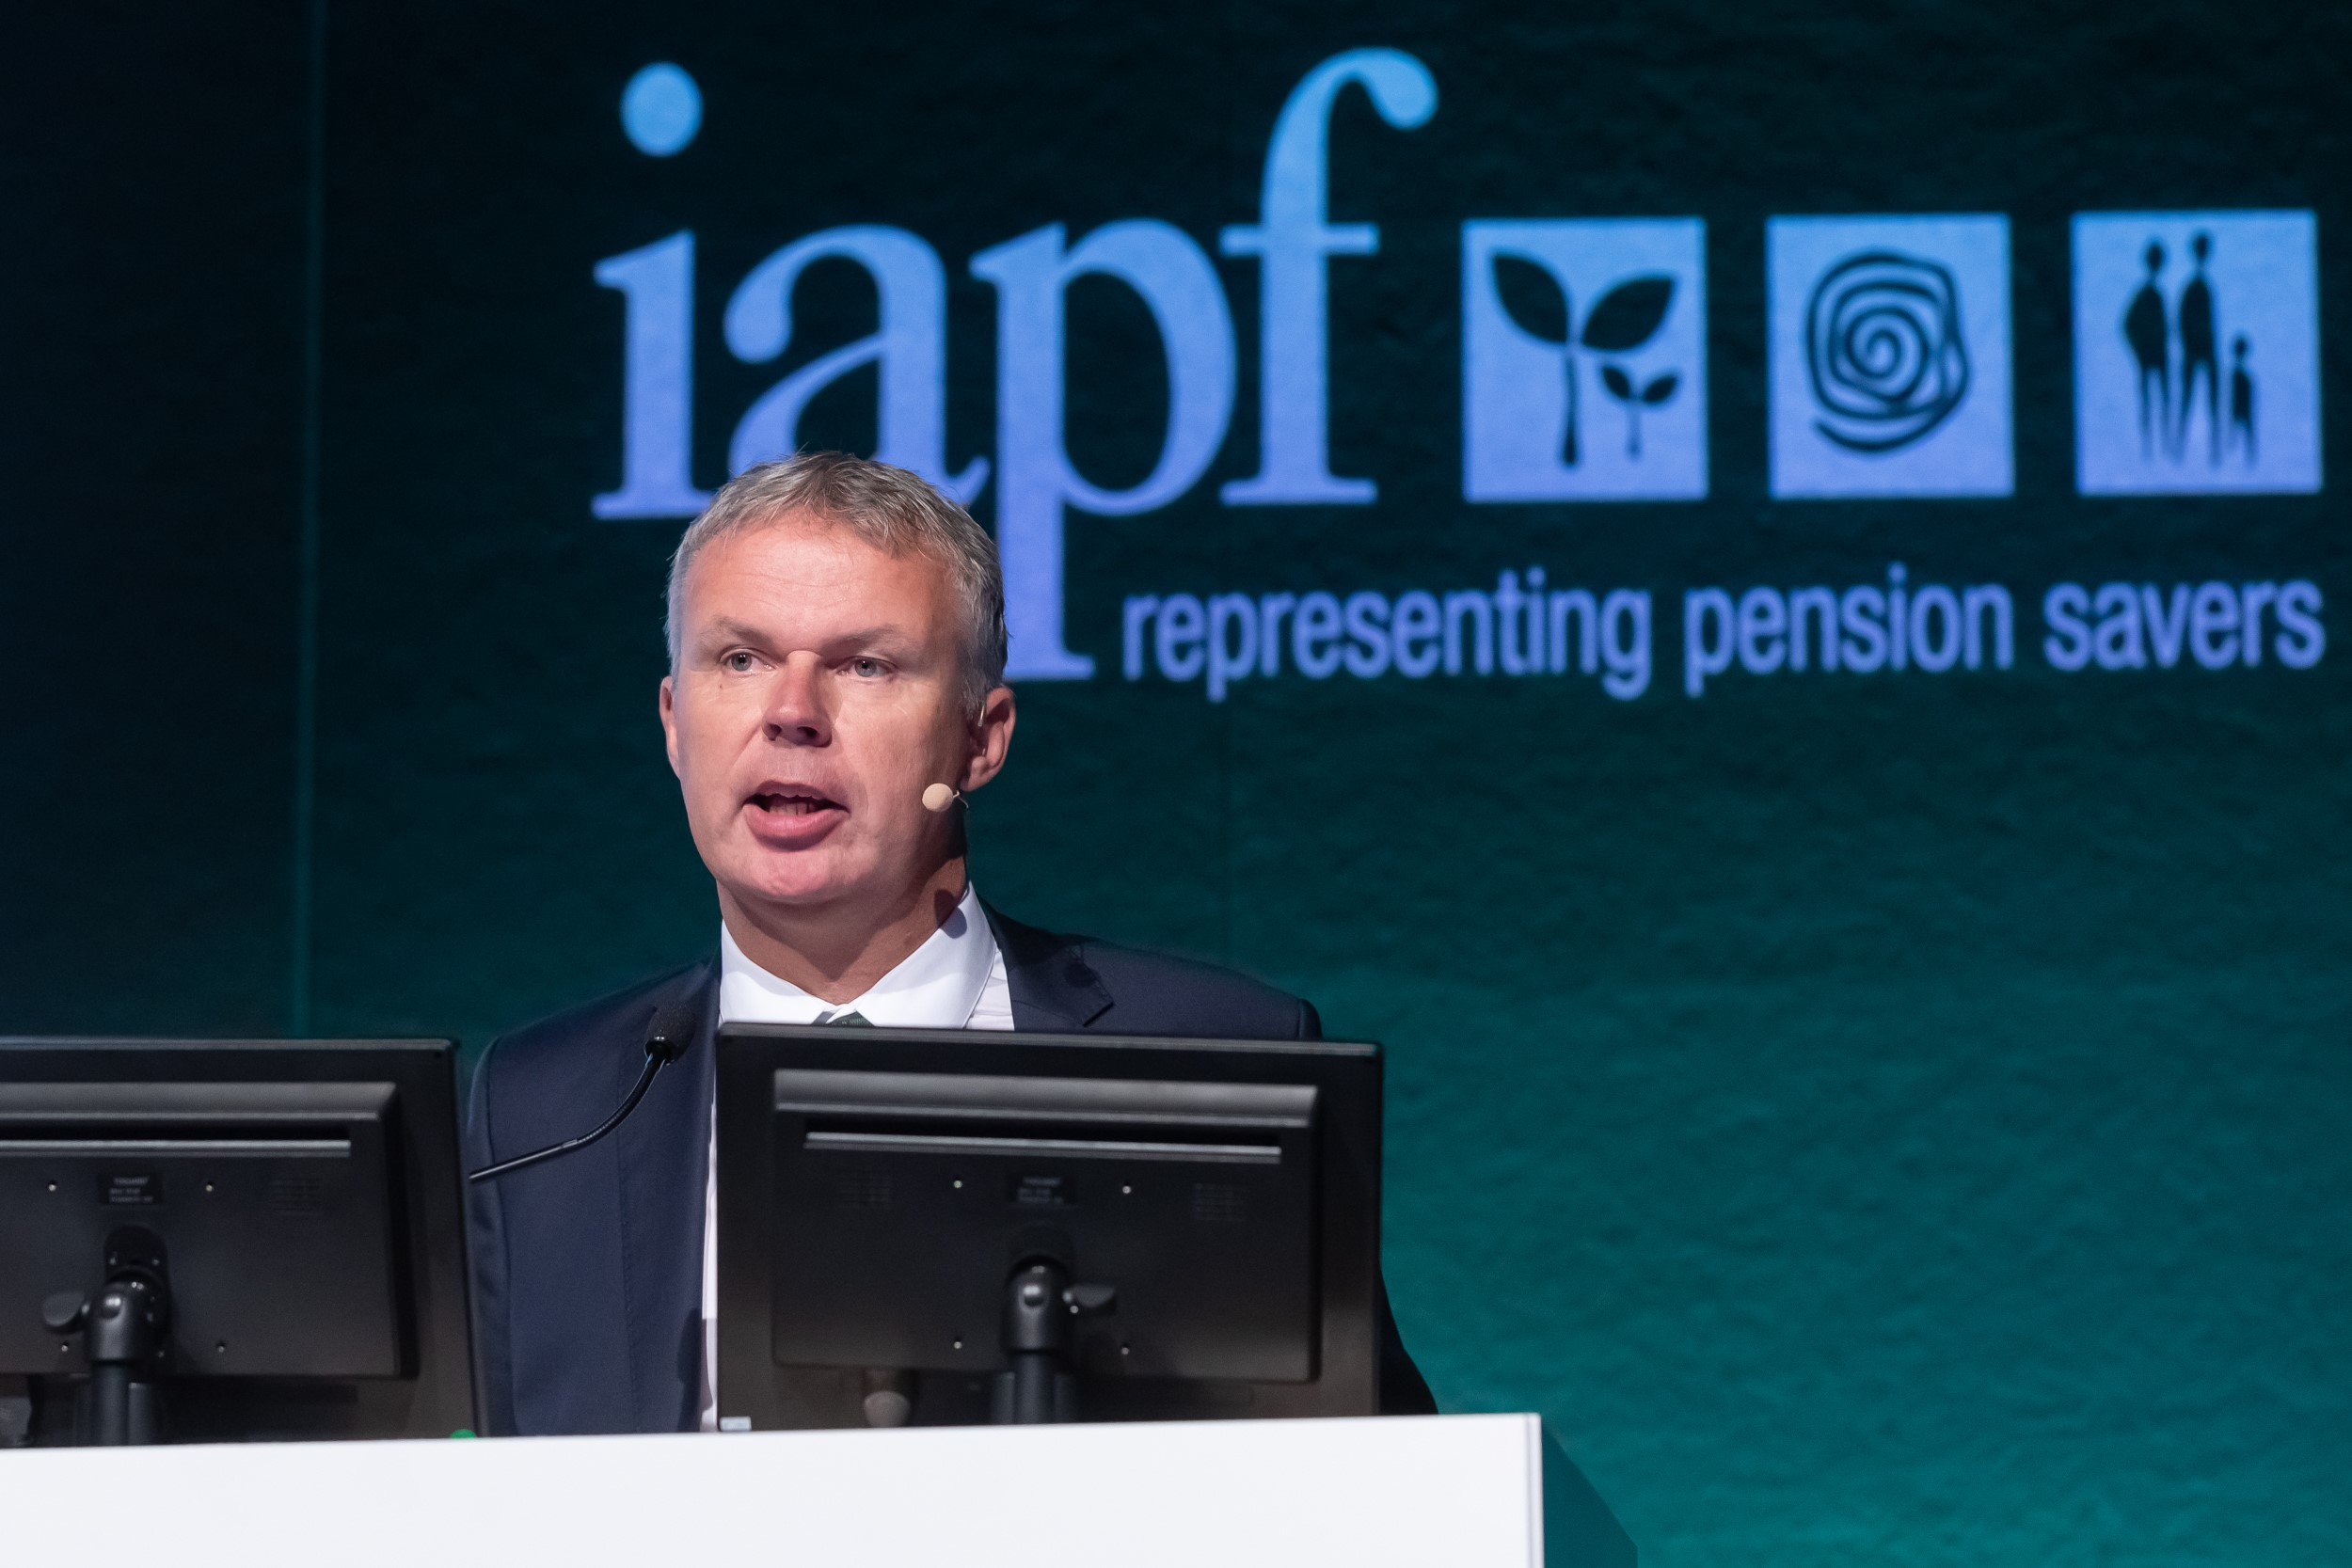 IAPF calls for the appointment of a Pensions Minister 